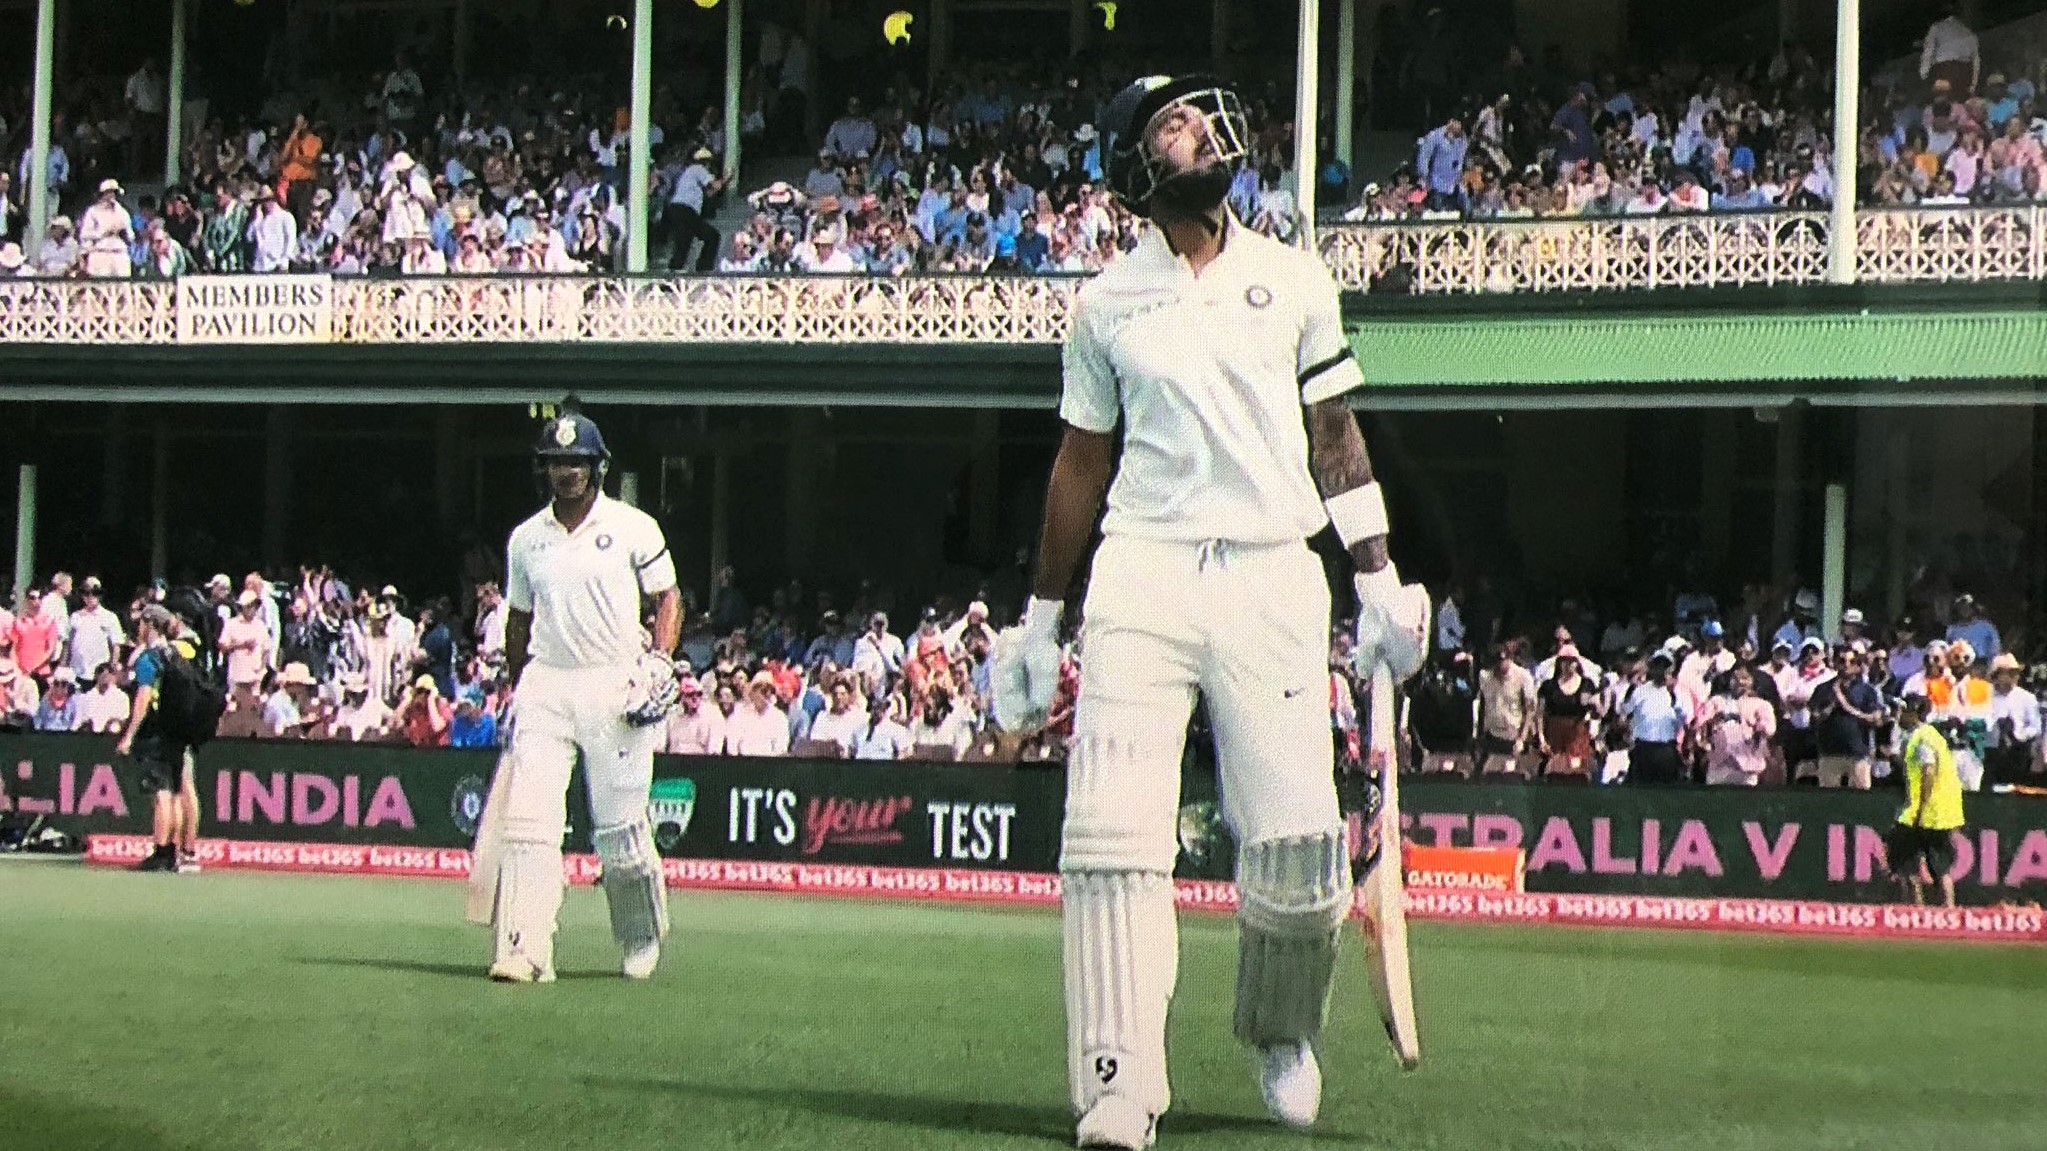 Aakash Chopra draws analogy to defend KL Rahul's place in Indian Test team